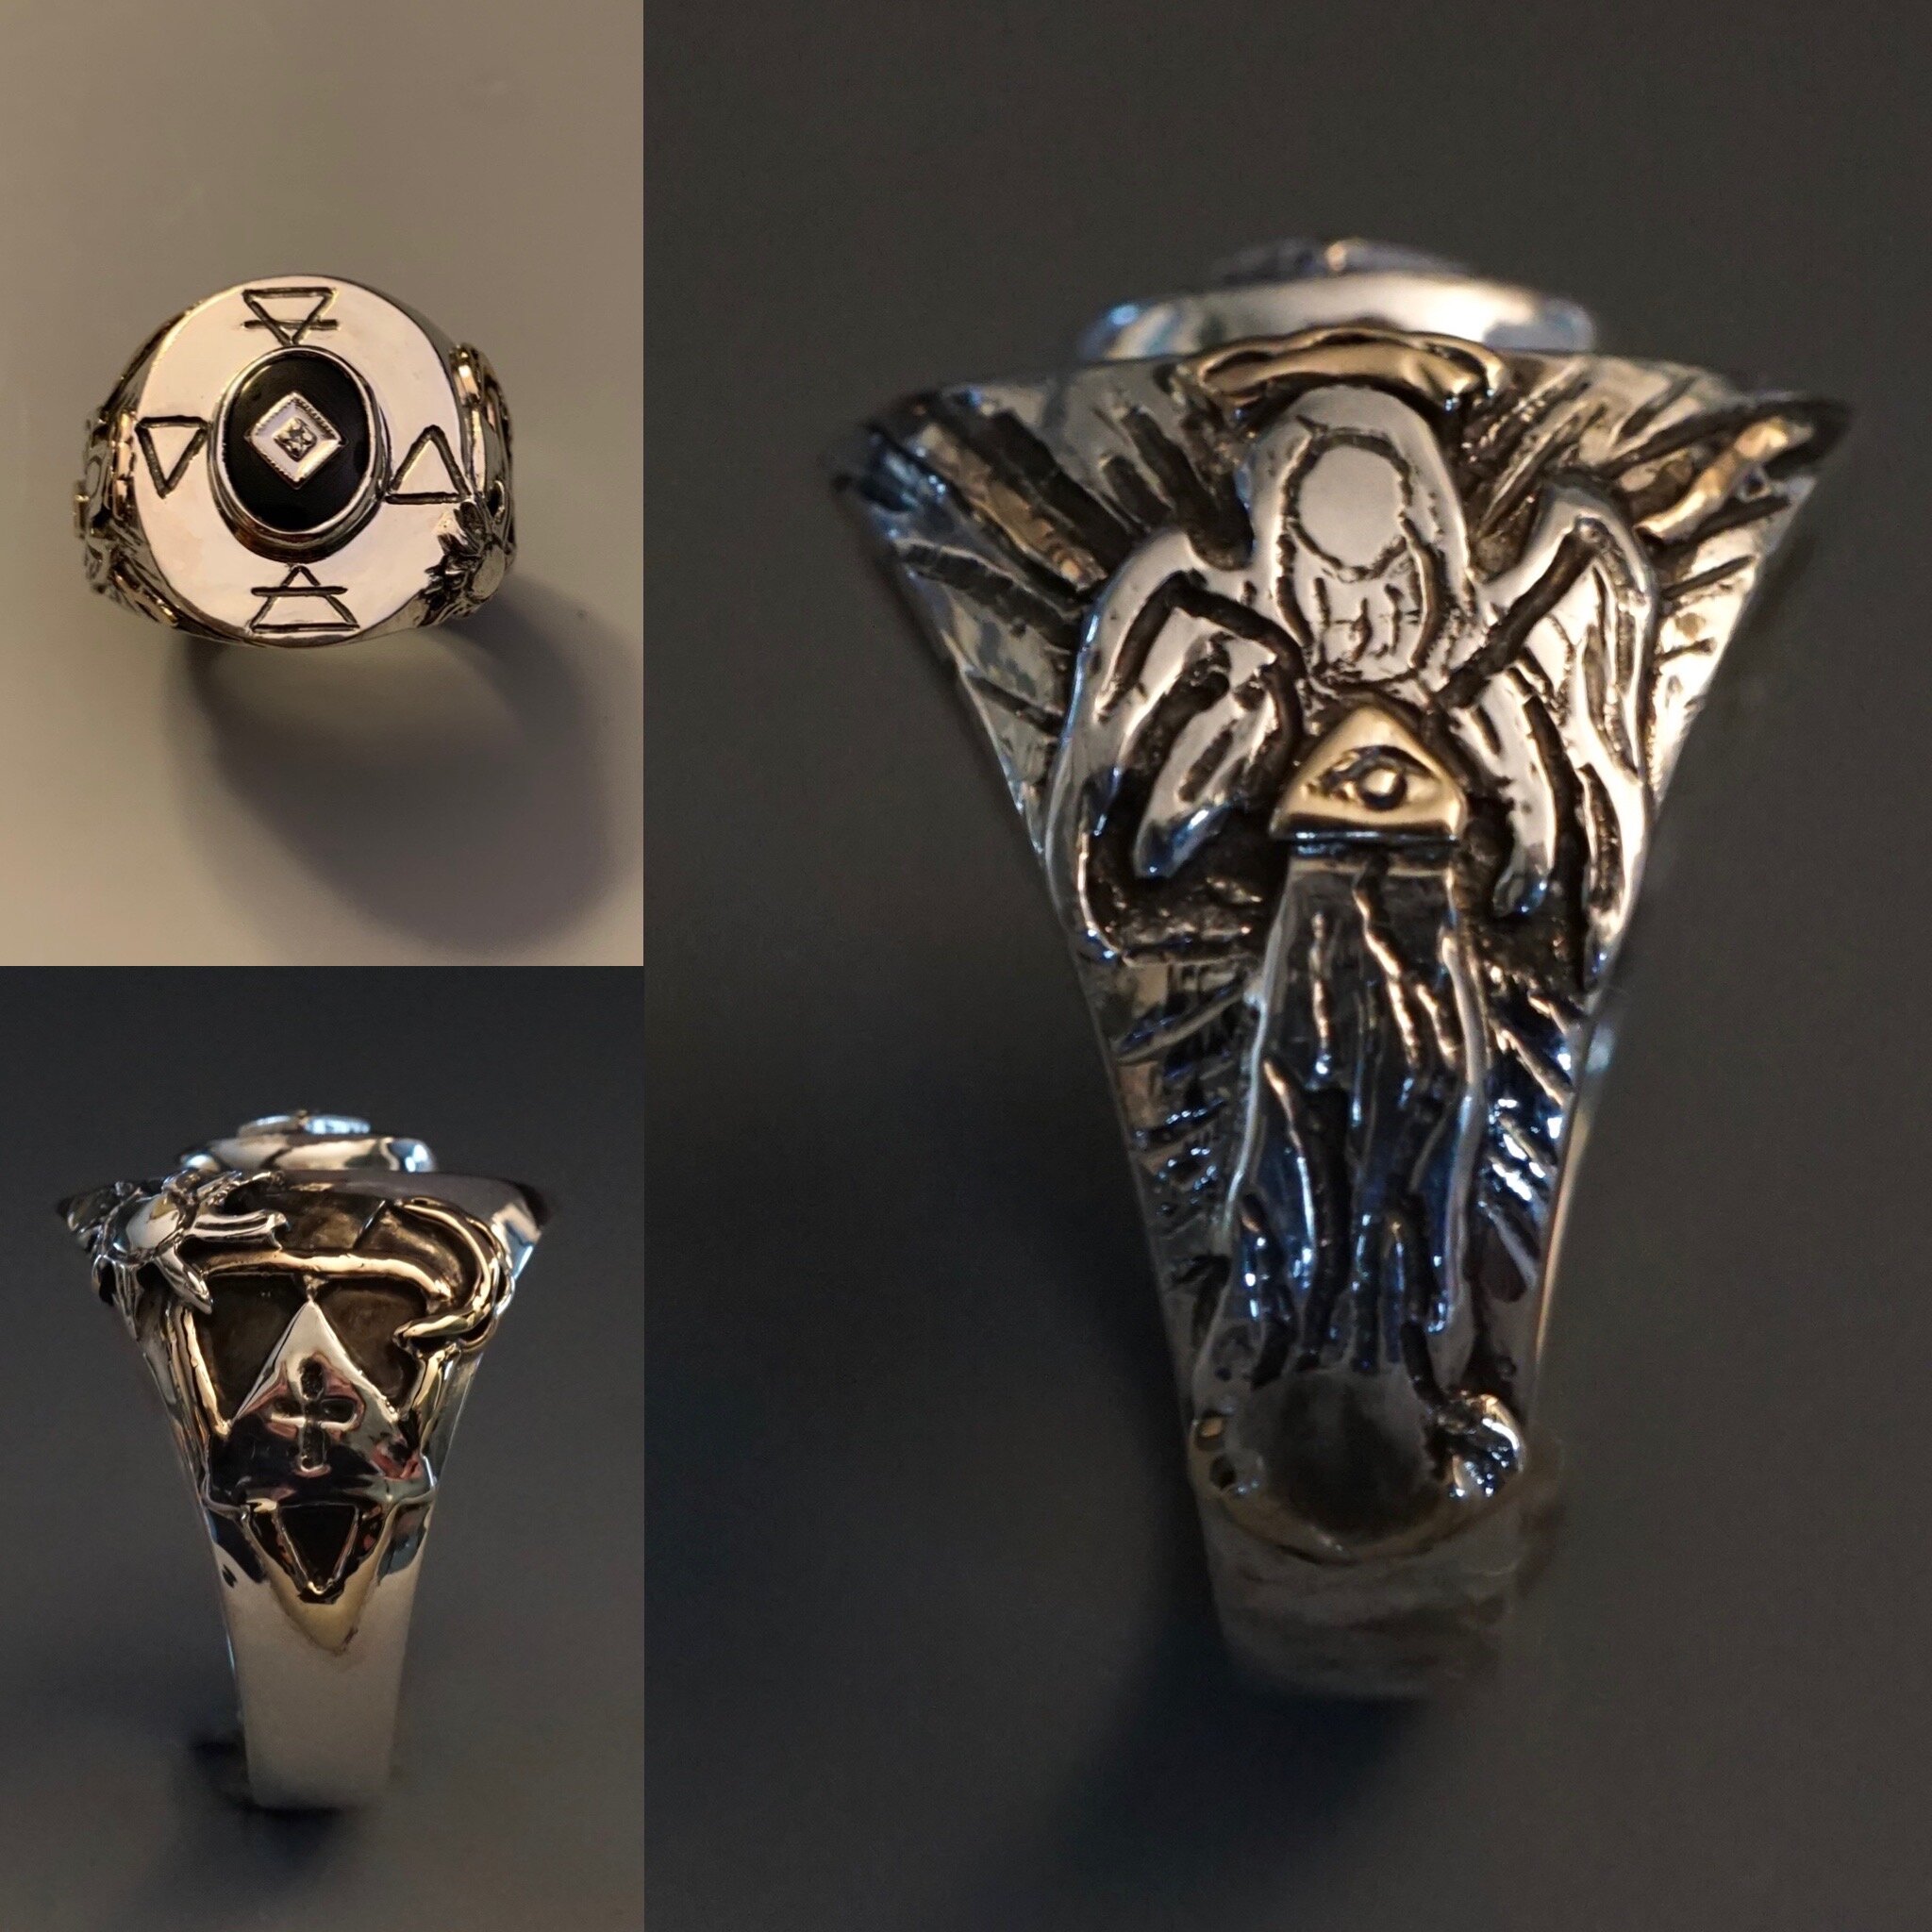 Ministry Ring